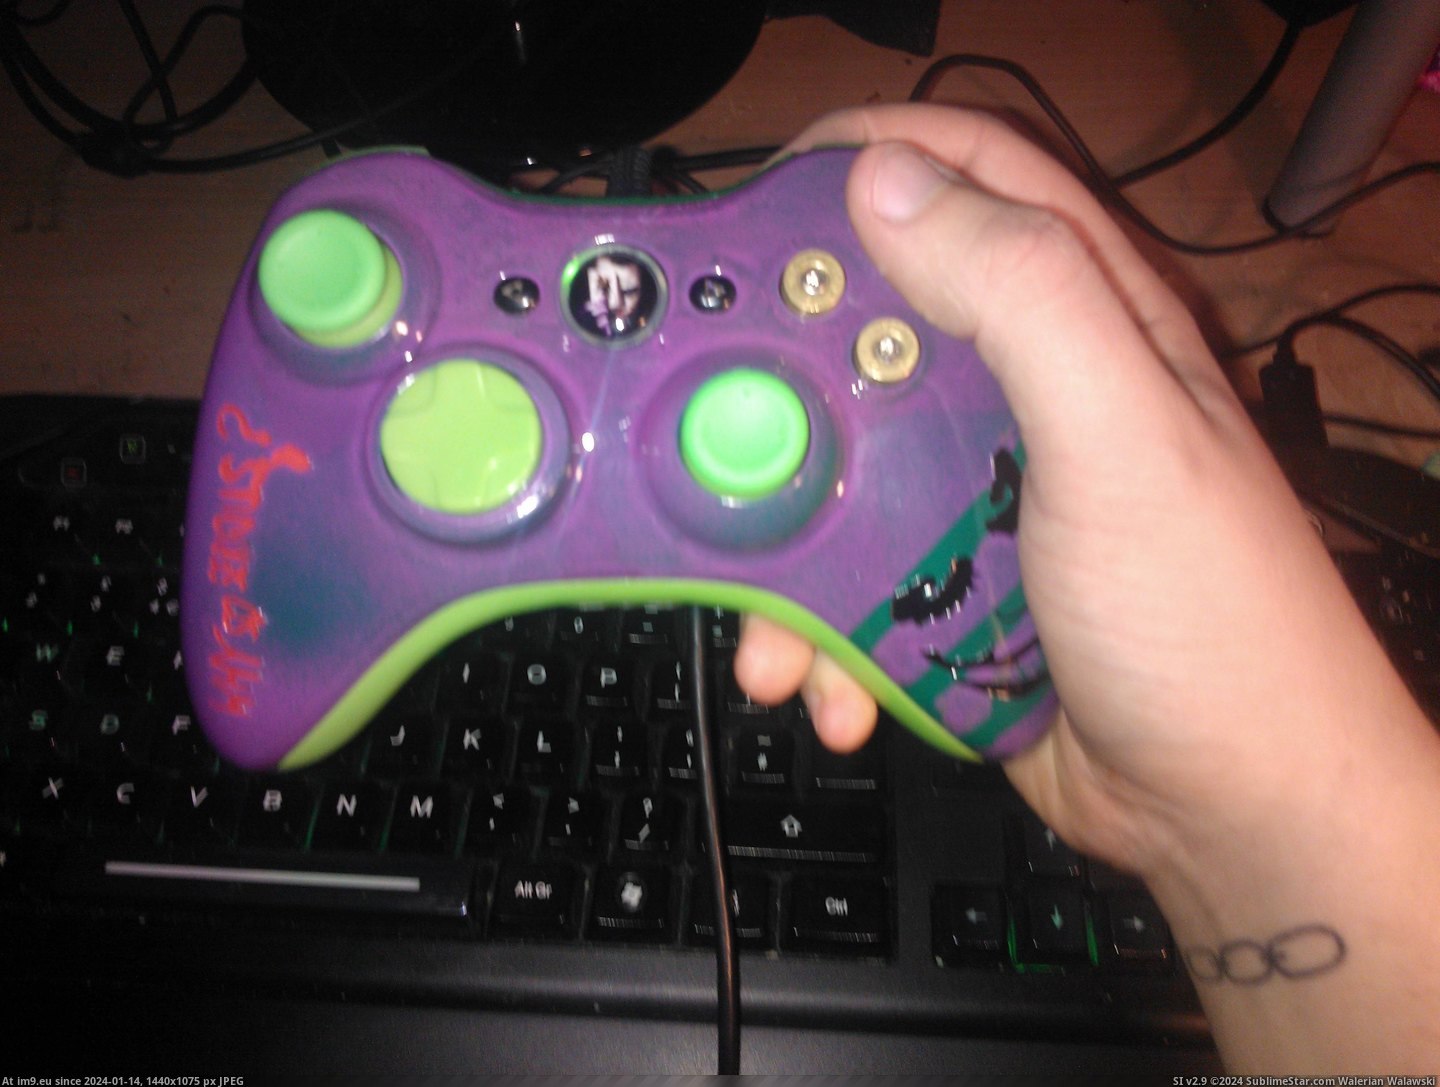 #Album #Gaming #Pretty #Law #Controllers #Brother #Cool #Xbox [Gaming] So my Brother in-law made some pretty cool custom xbox controllers [ALBUM] 8 Pic. (Bild von album My r/GAMING favs))